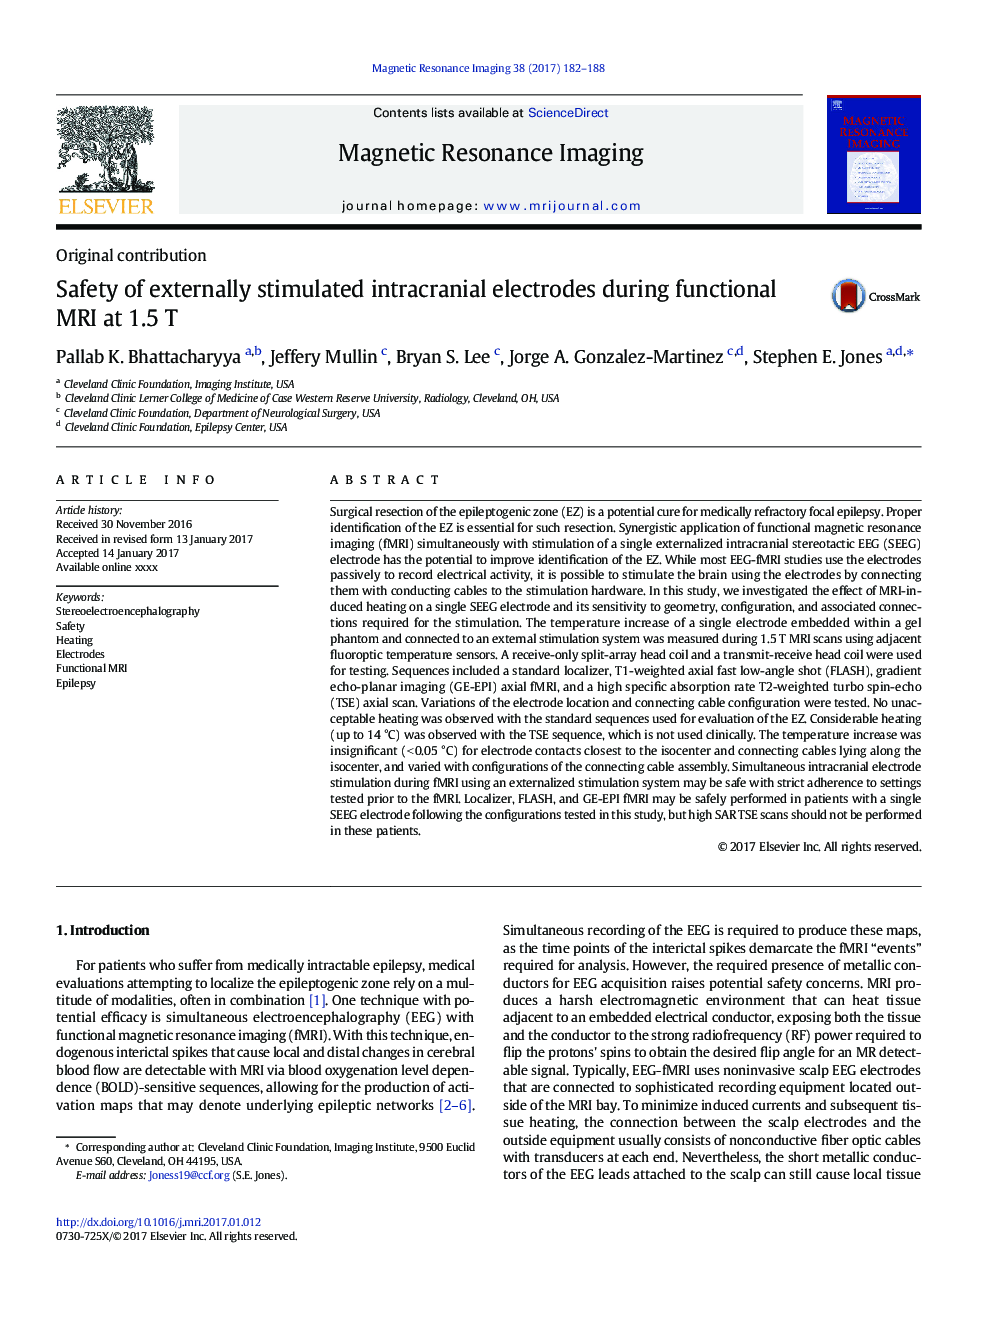 Safety of externally stimulated intracranial electrodes during functional MRI at 1.5Â T